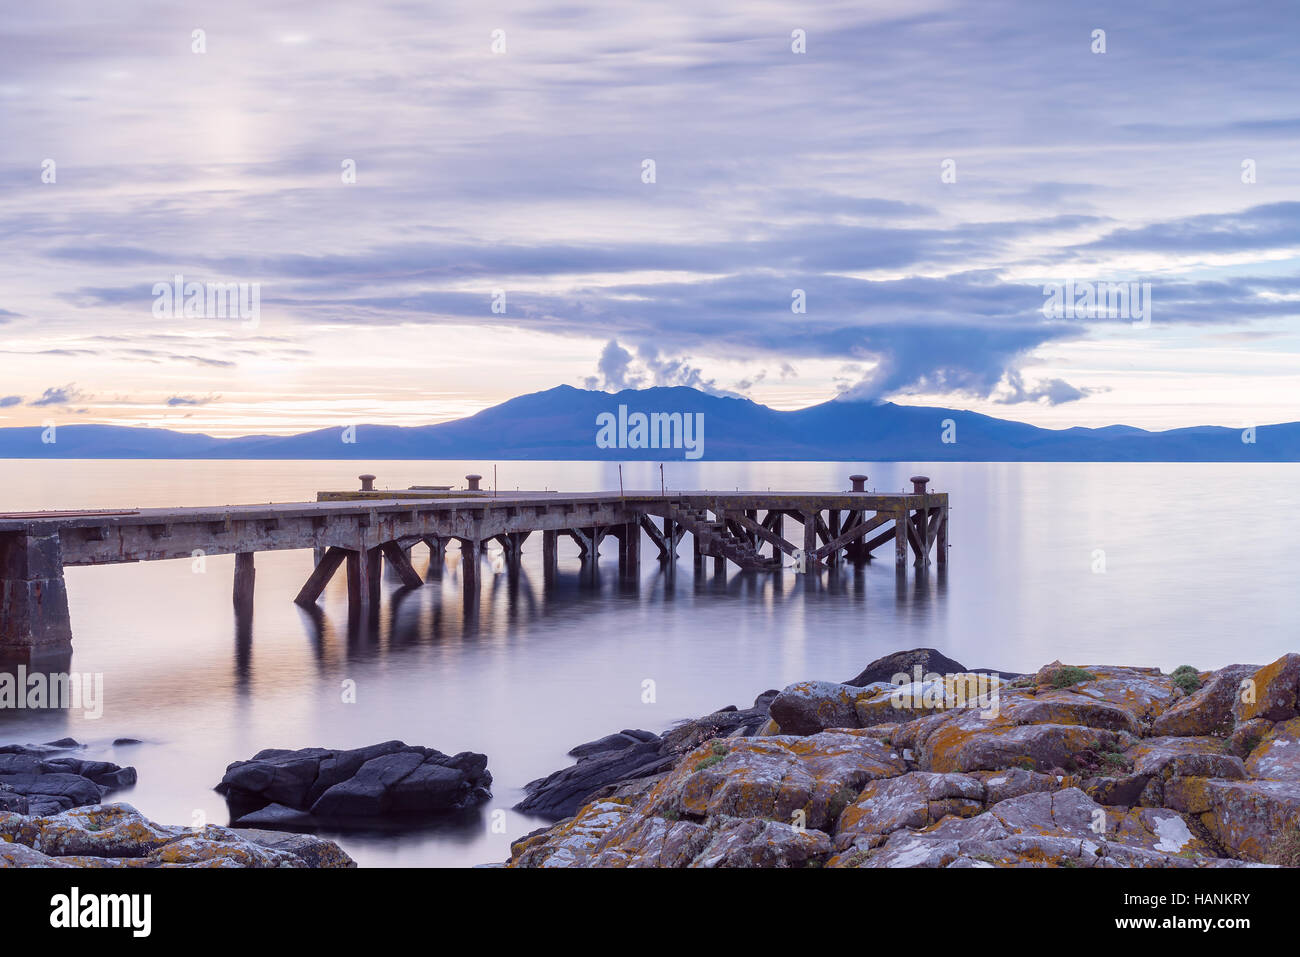 The Old Jetty or Pier at Portencross with the Arran Hills in the background. Stock Photo